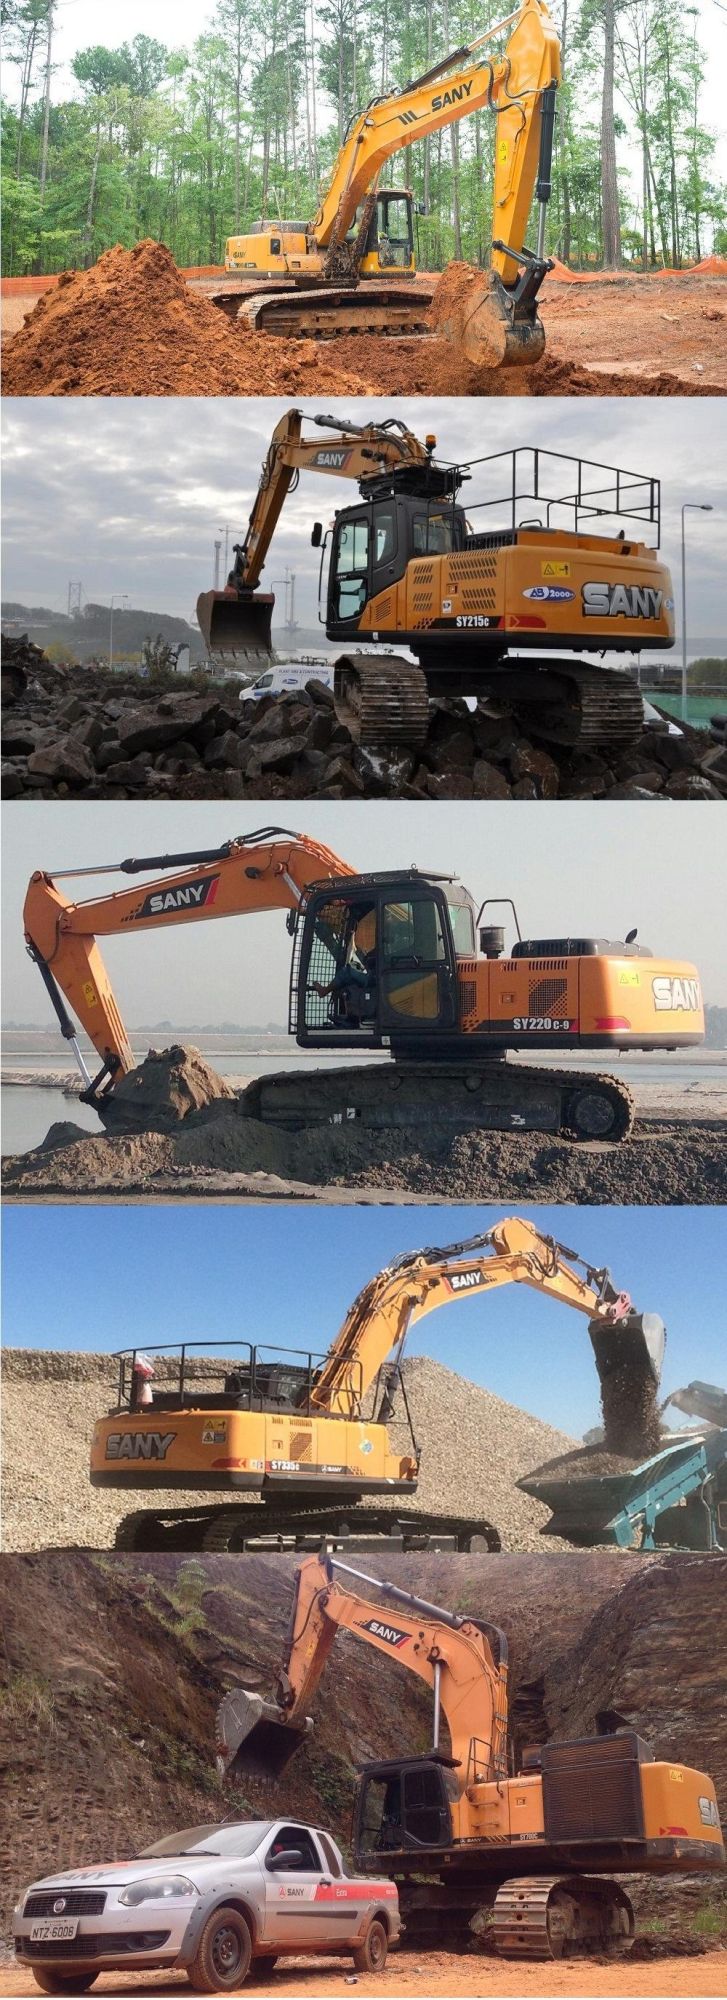 Sany Sy395h Hydraulic Digging Excavators Mining Machines Large Excavator for Sale